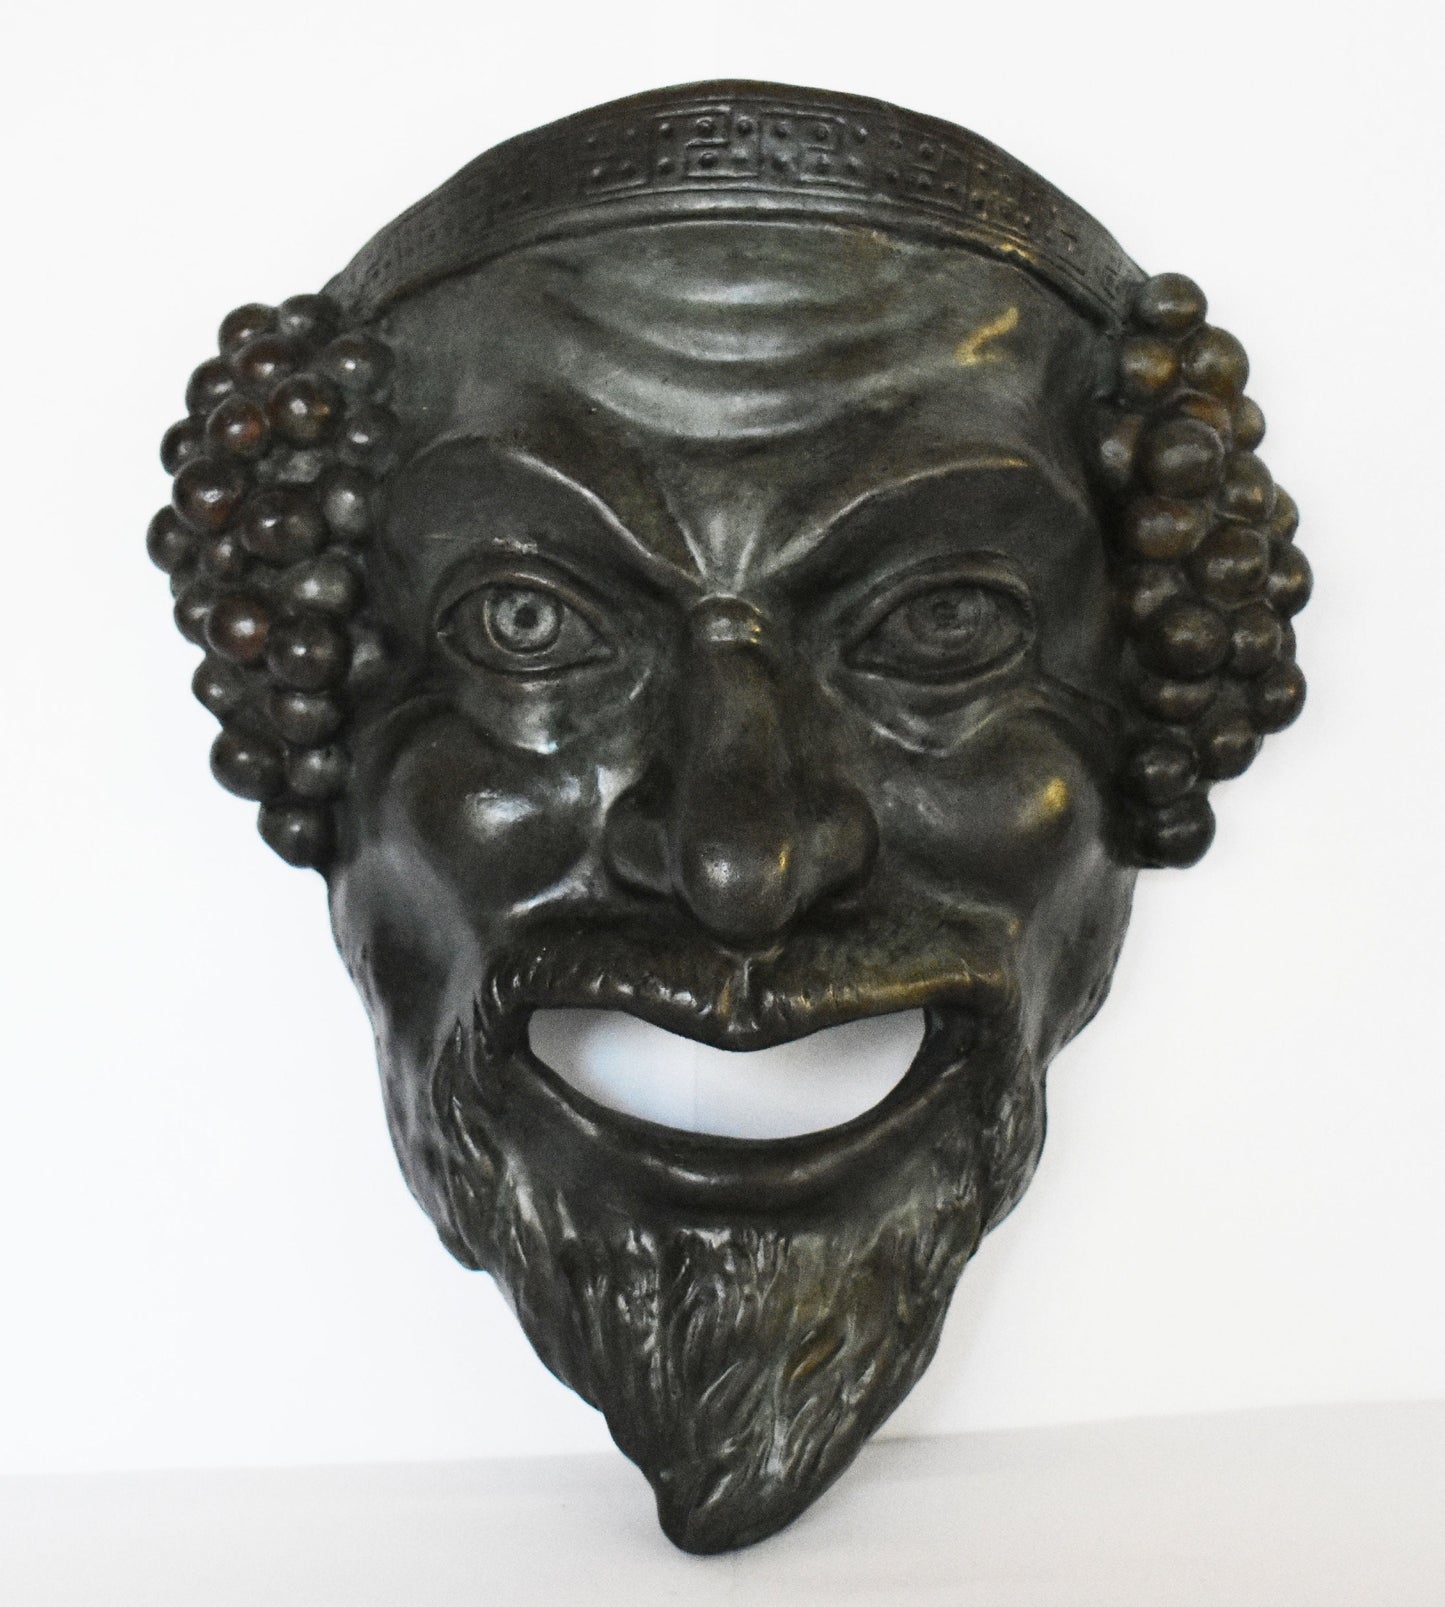 Dionysus Mask - Greek God of Wine, Fertility, Ritual Madness, Theater and Religious Ecstasy- Wall Decoration - Bronze Colour Effect